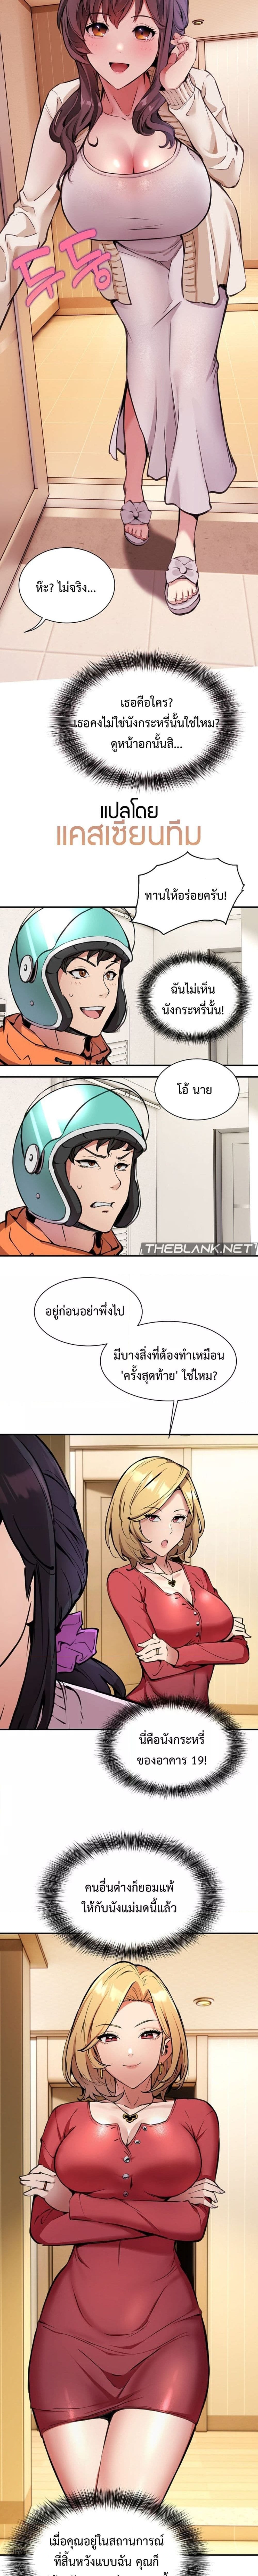 Driver in the New City ตอนที่ 1 ภาพ 16